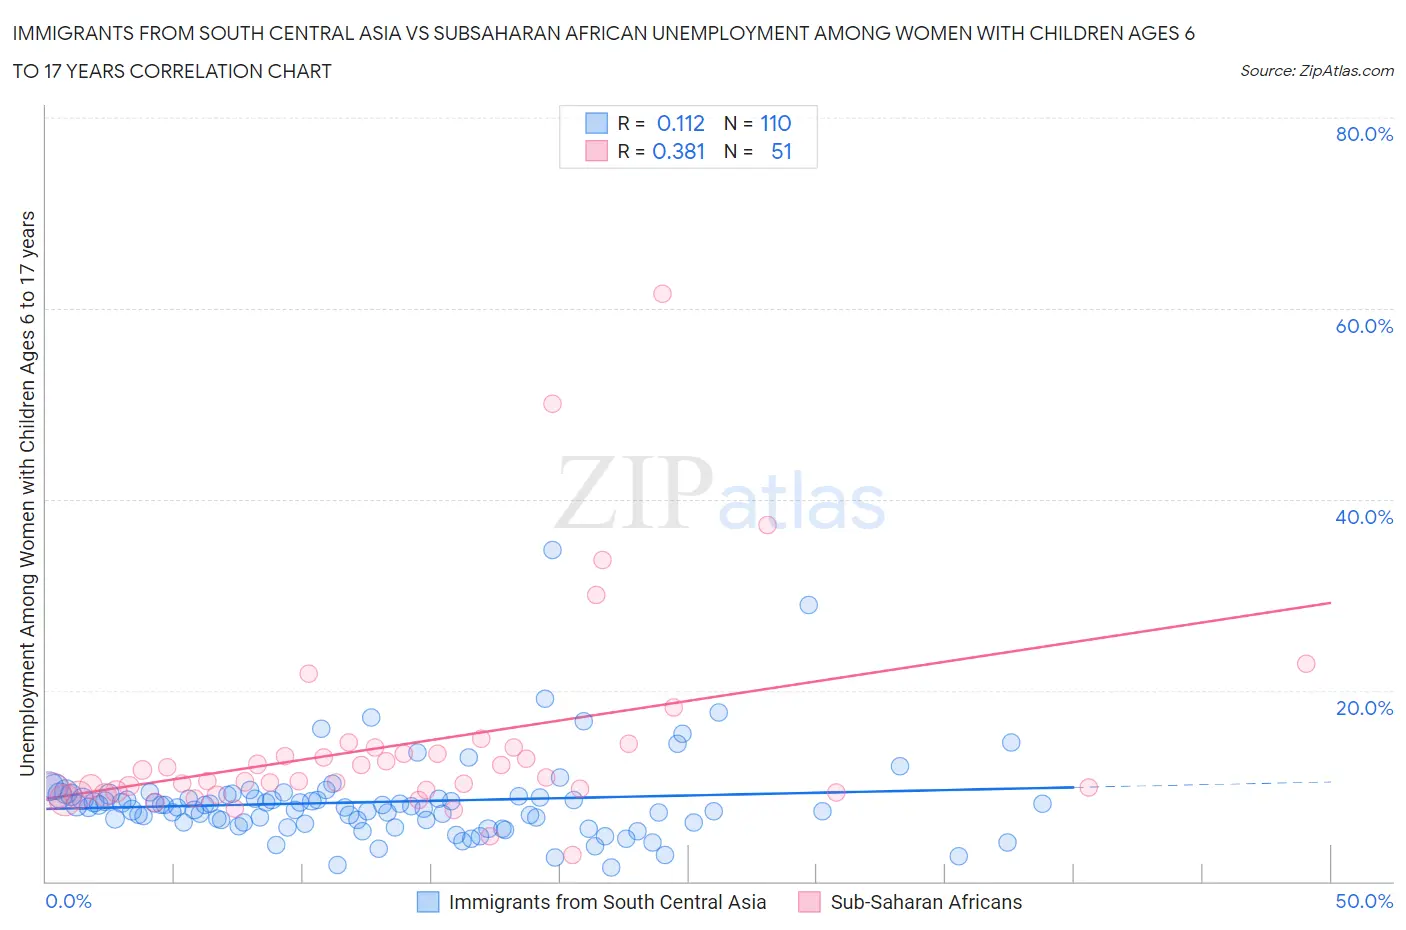 Immigrants from South Central Asia vs Subsaharan African Unemployment Among Women with Children Ages 6 to 17 years